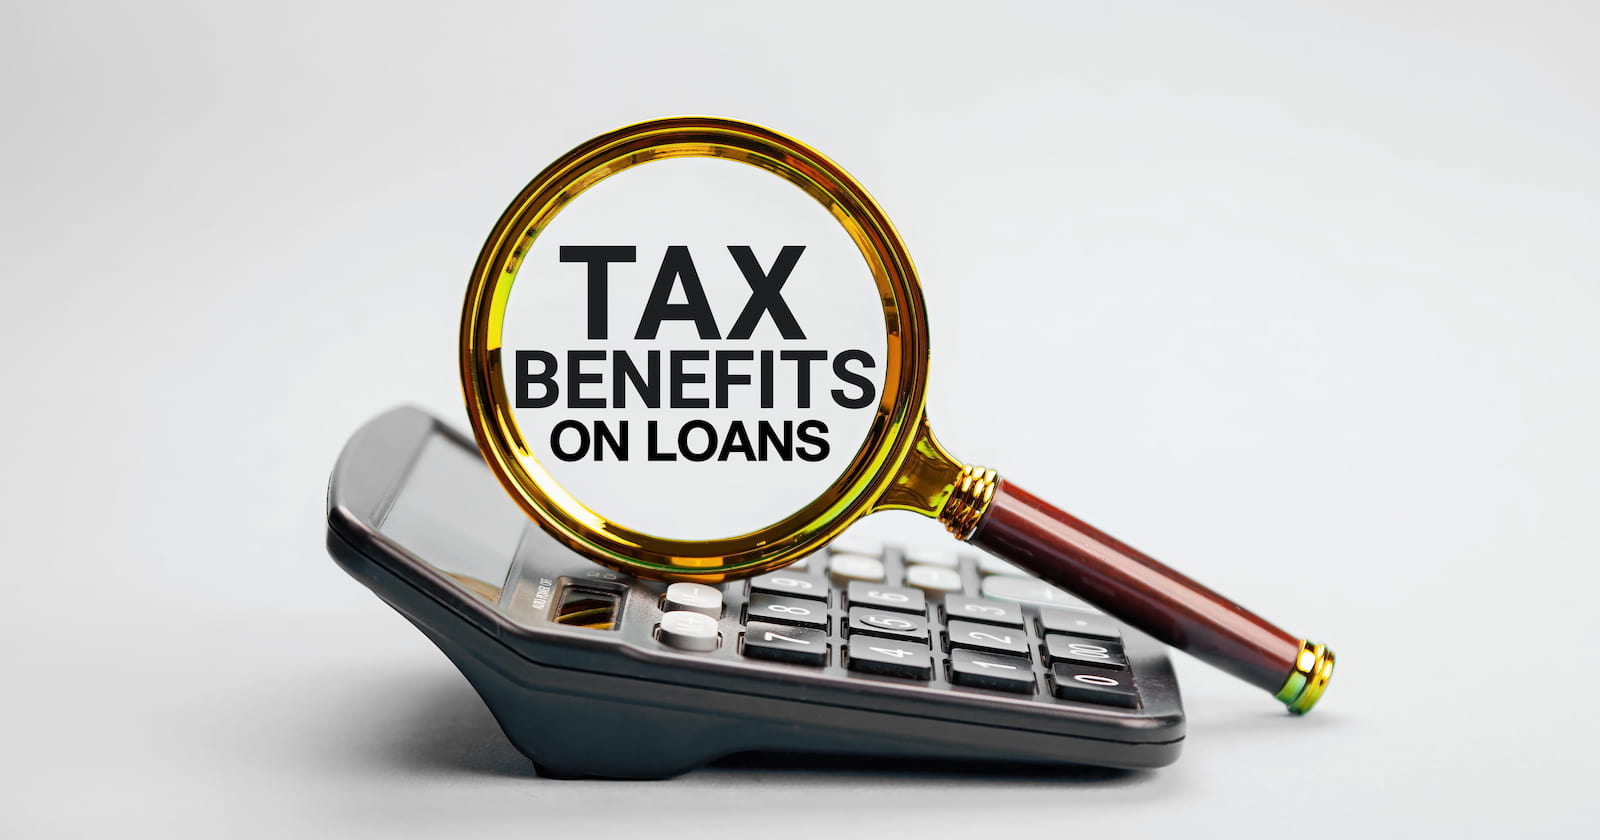 4 Different Types of Loans that have Tax Benefits!